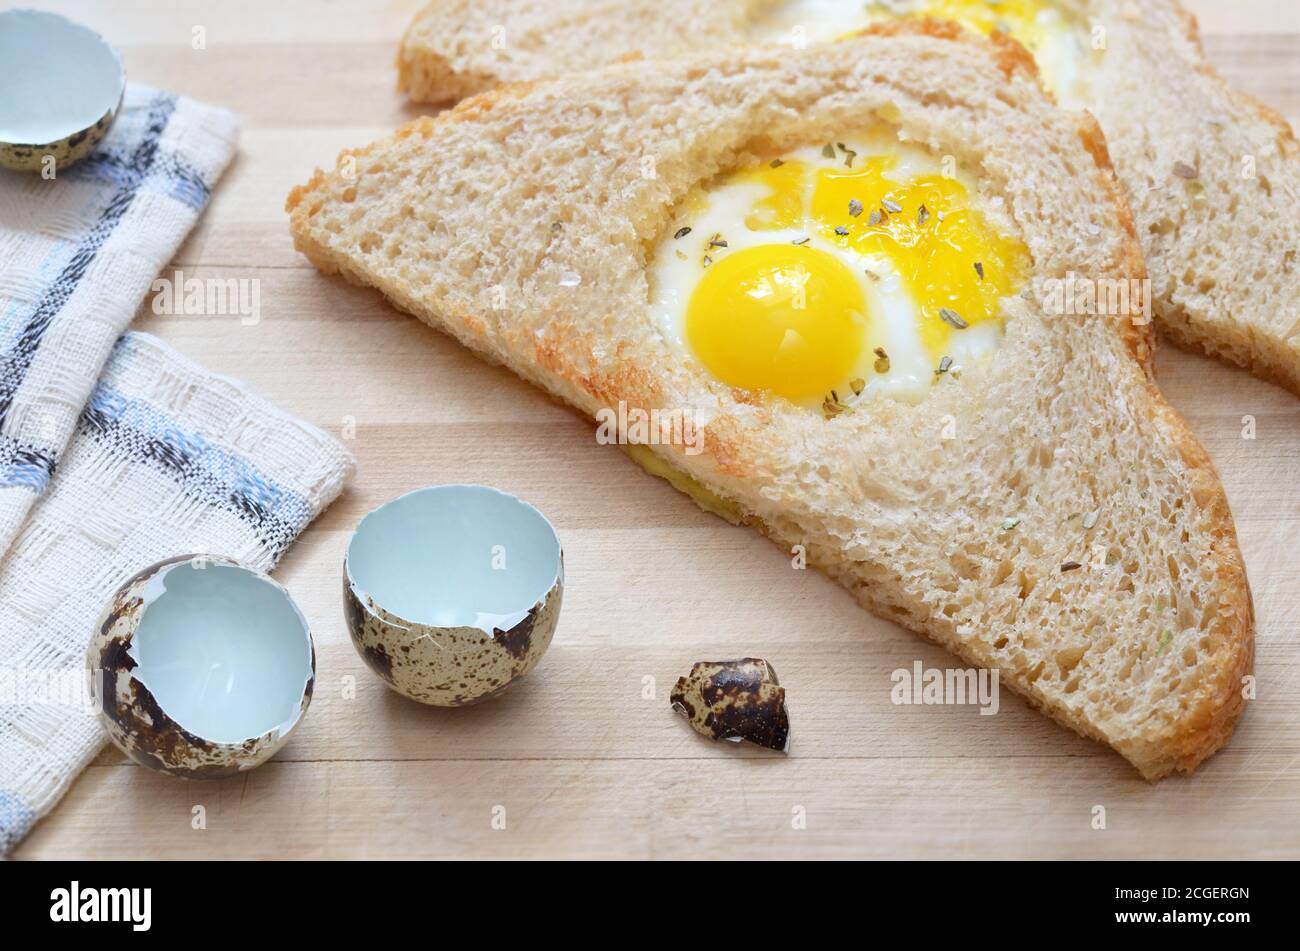 Fried slice of bread with quail egg on a wooden cutting board with a kitchen towel and eggshells, selective focus. Healthy eating concept. Stock Photo